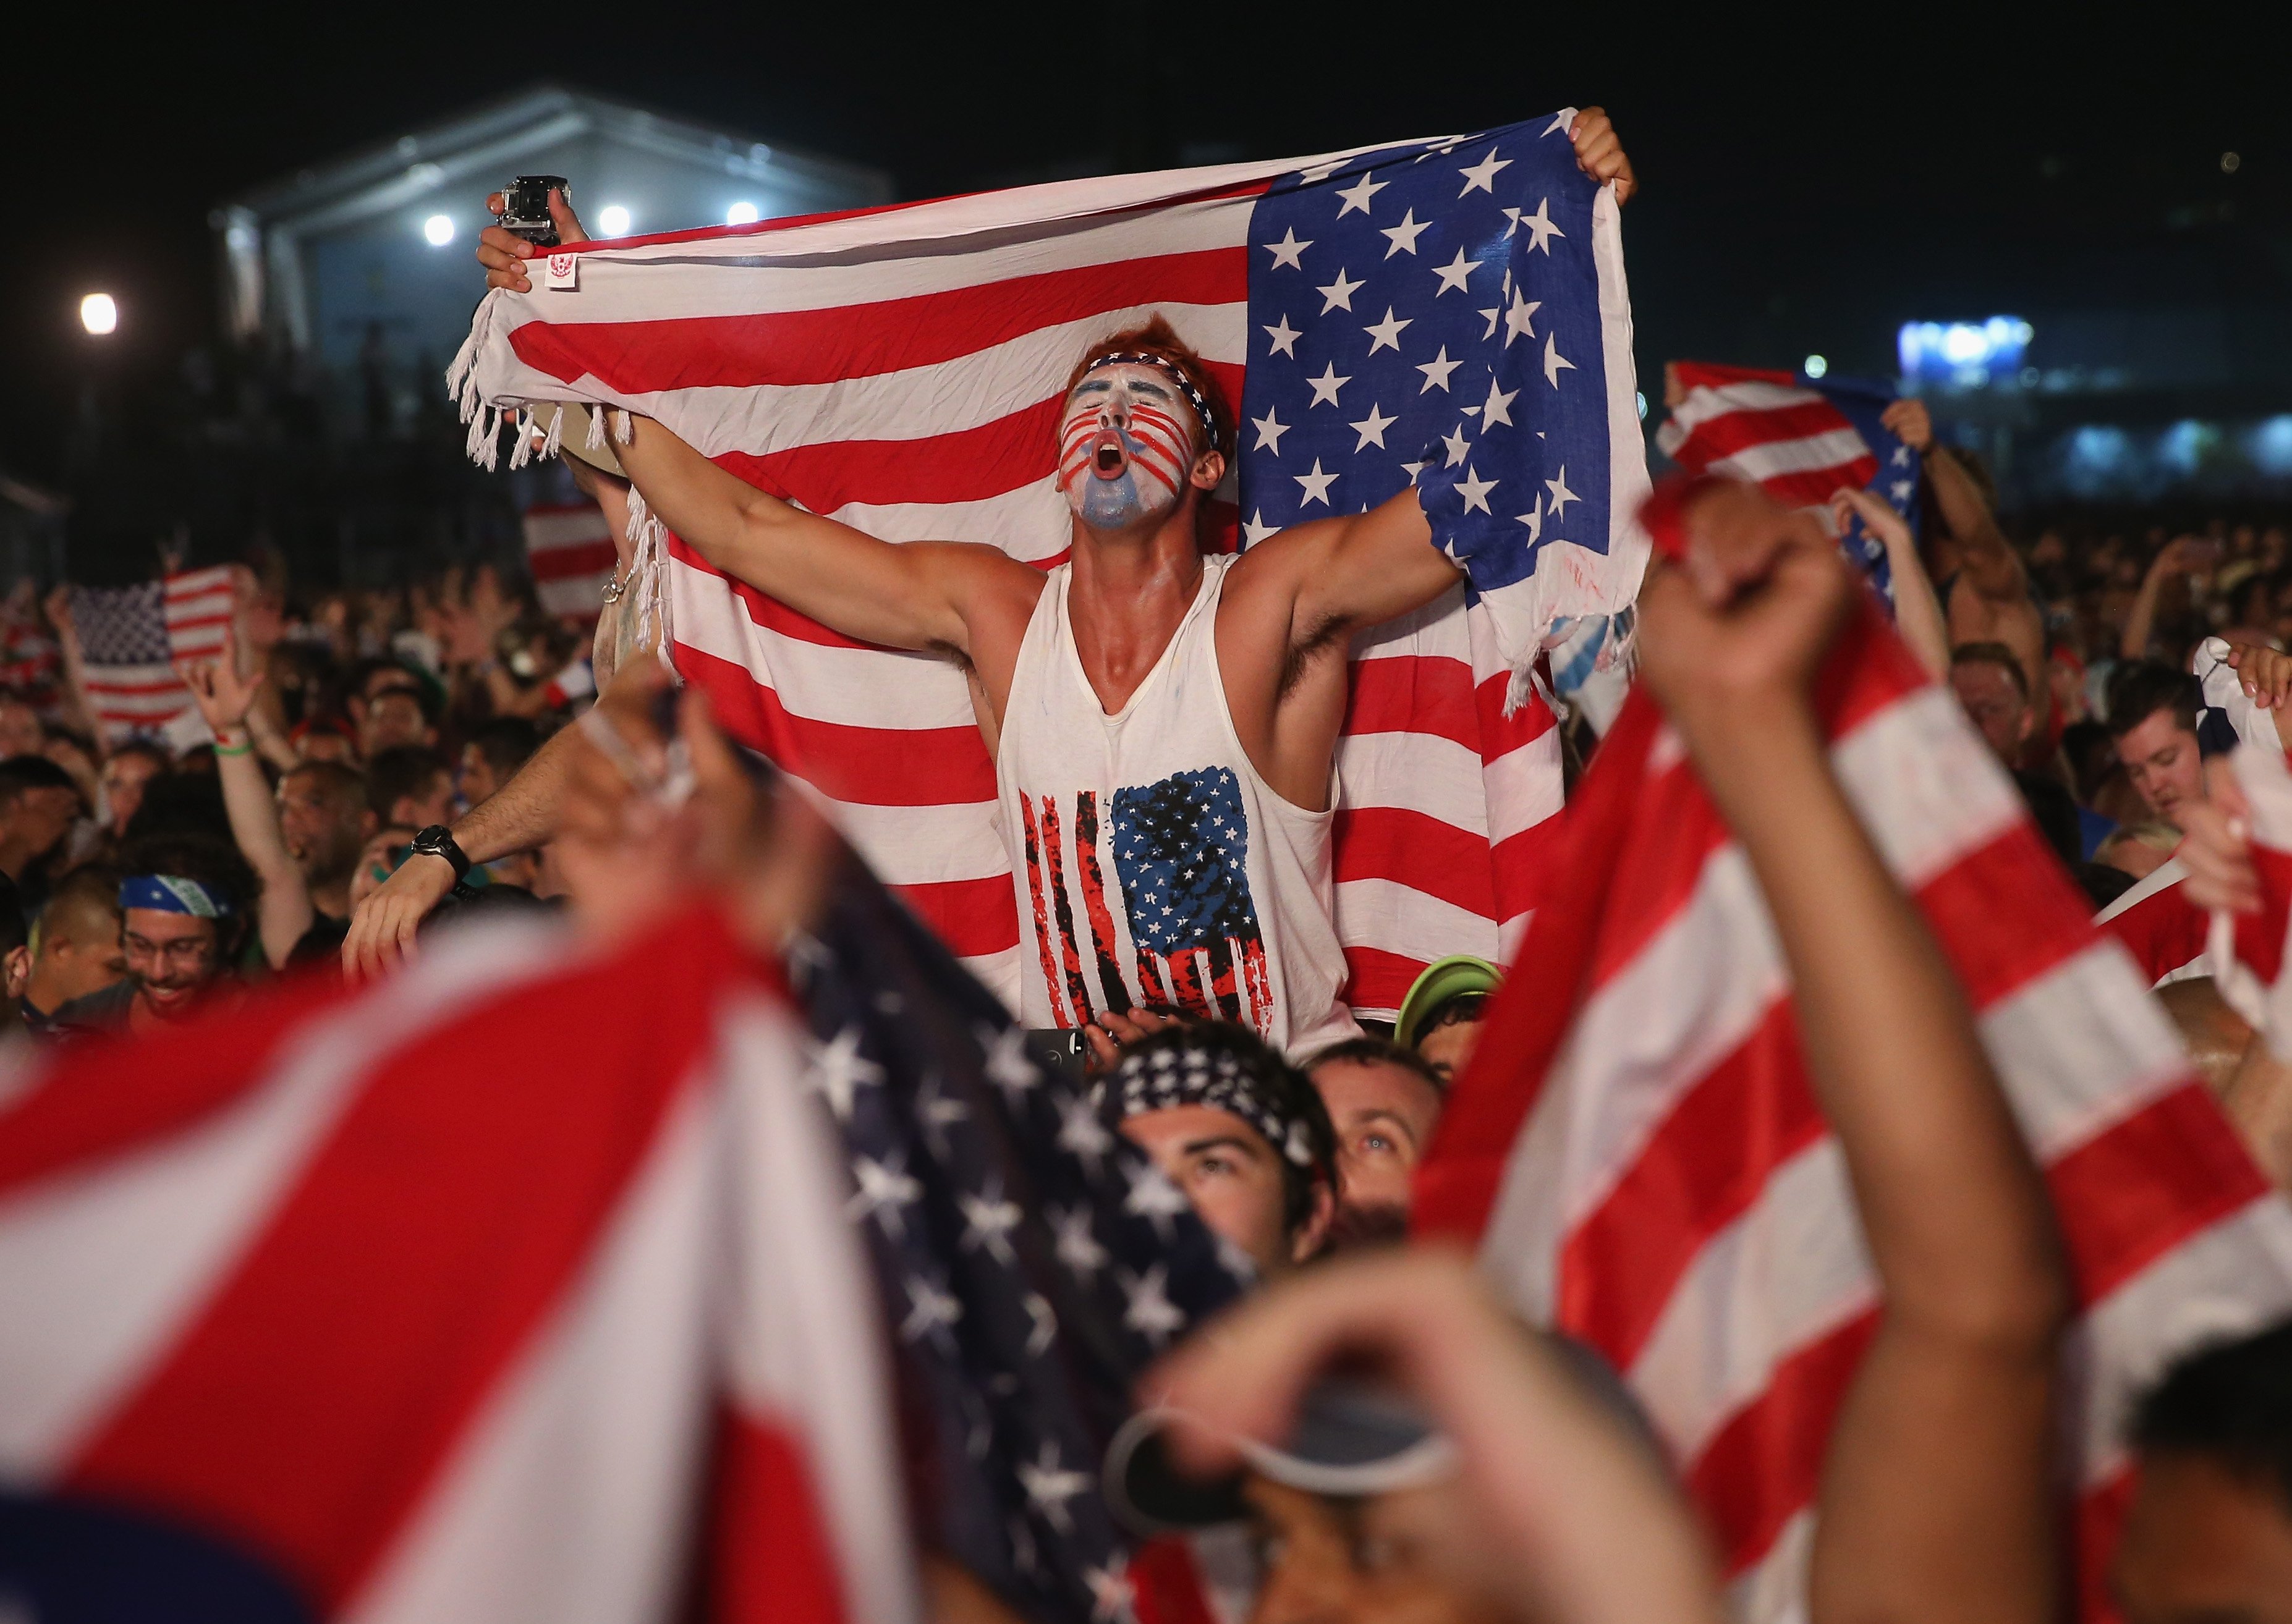 American soccer fans react to their team beating Ghana 2-1 as they watch on a large screen at the FIFA World Cup Fan Fest on Copacabana beach on June 16, 2014 in Rio de Janeiro.